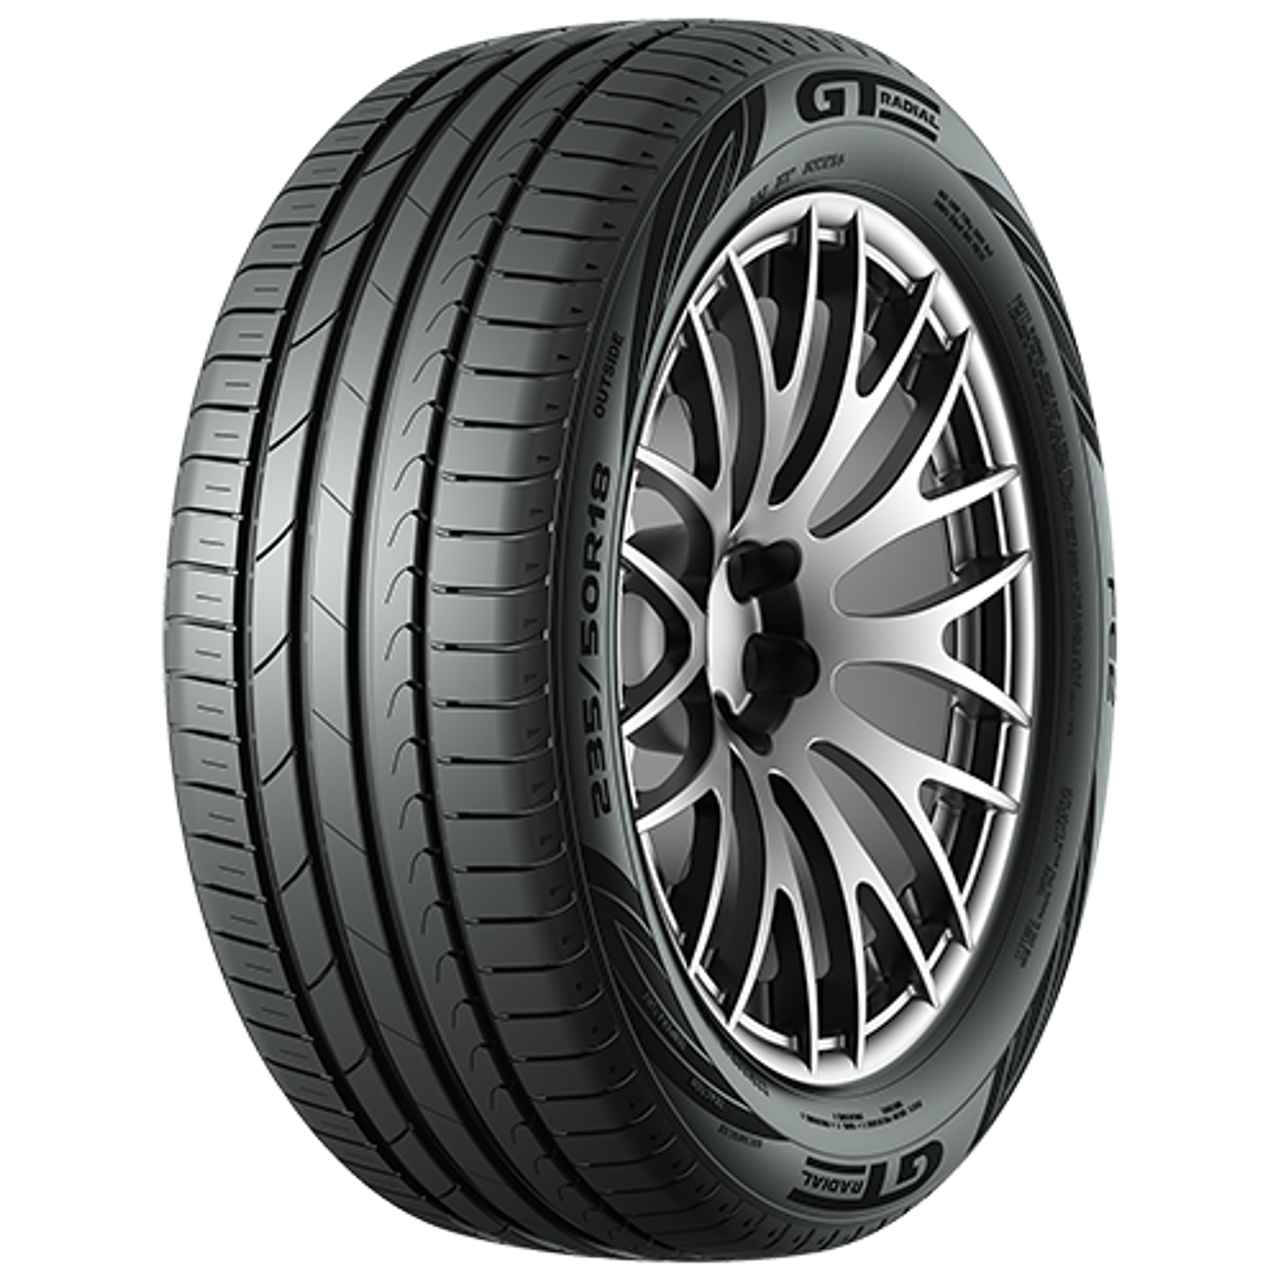 GT-RADIAL FE2 195/55R15 85H BSW